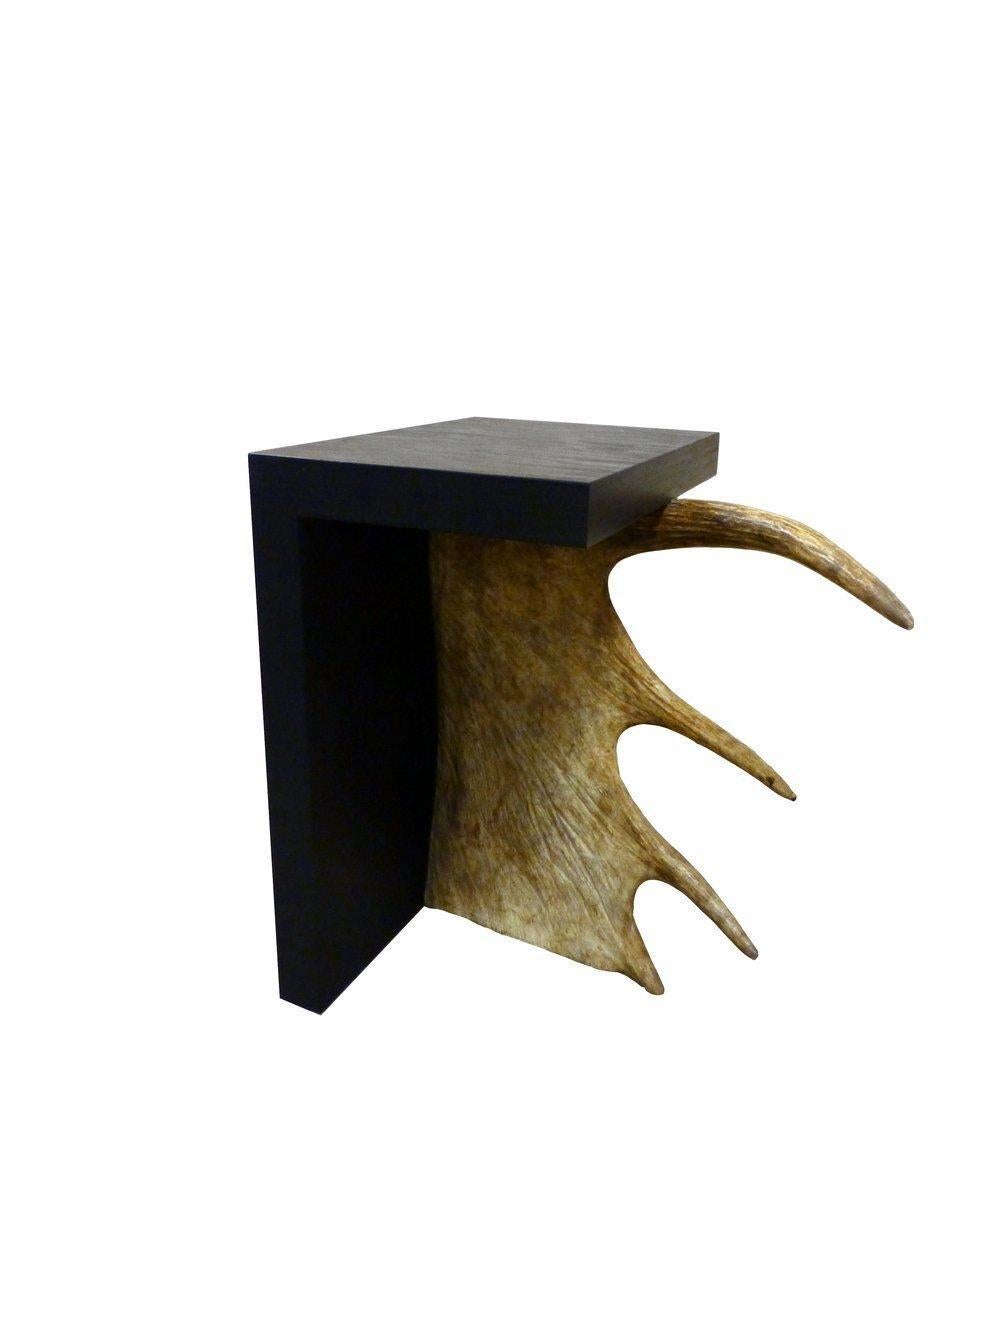 Rick Owens Stag T in black plywood has a T-shape structure and a natural antler moose horn on the side
Stool in Stained Plywood with Moose Antler.

